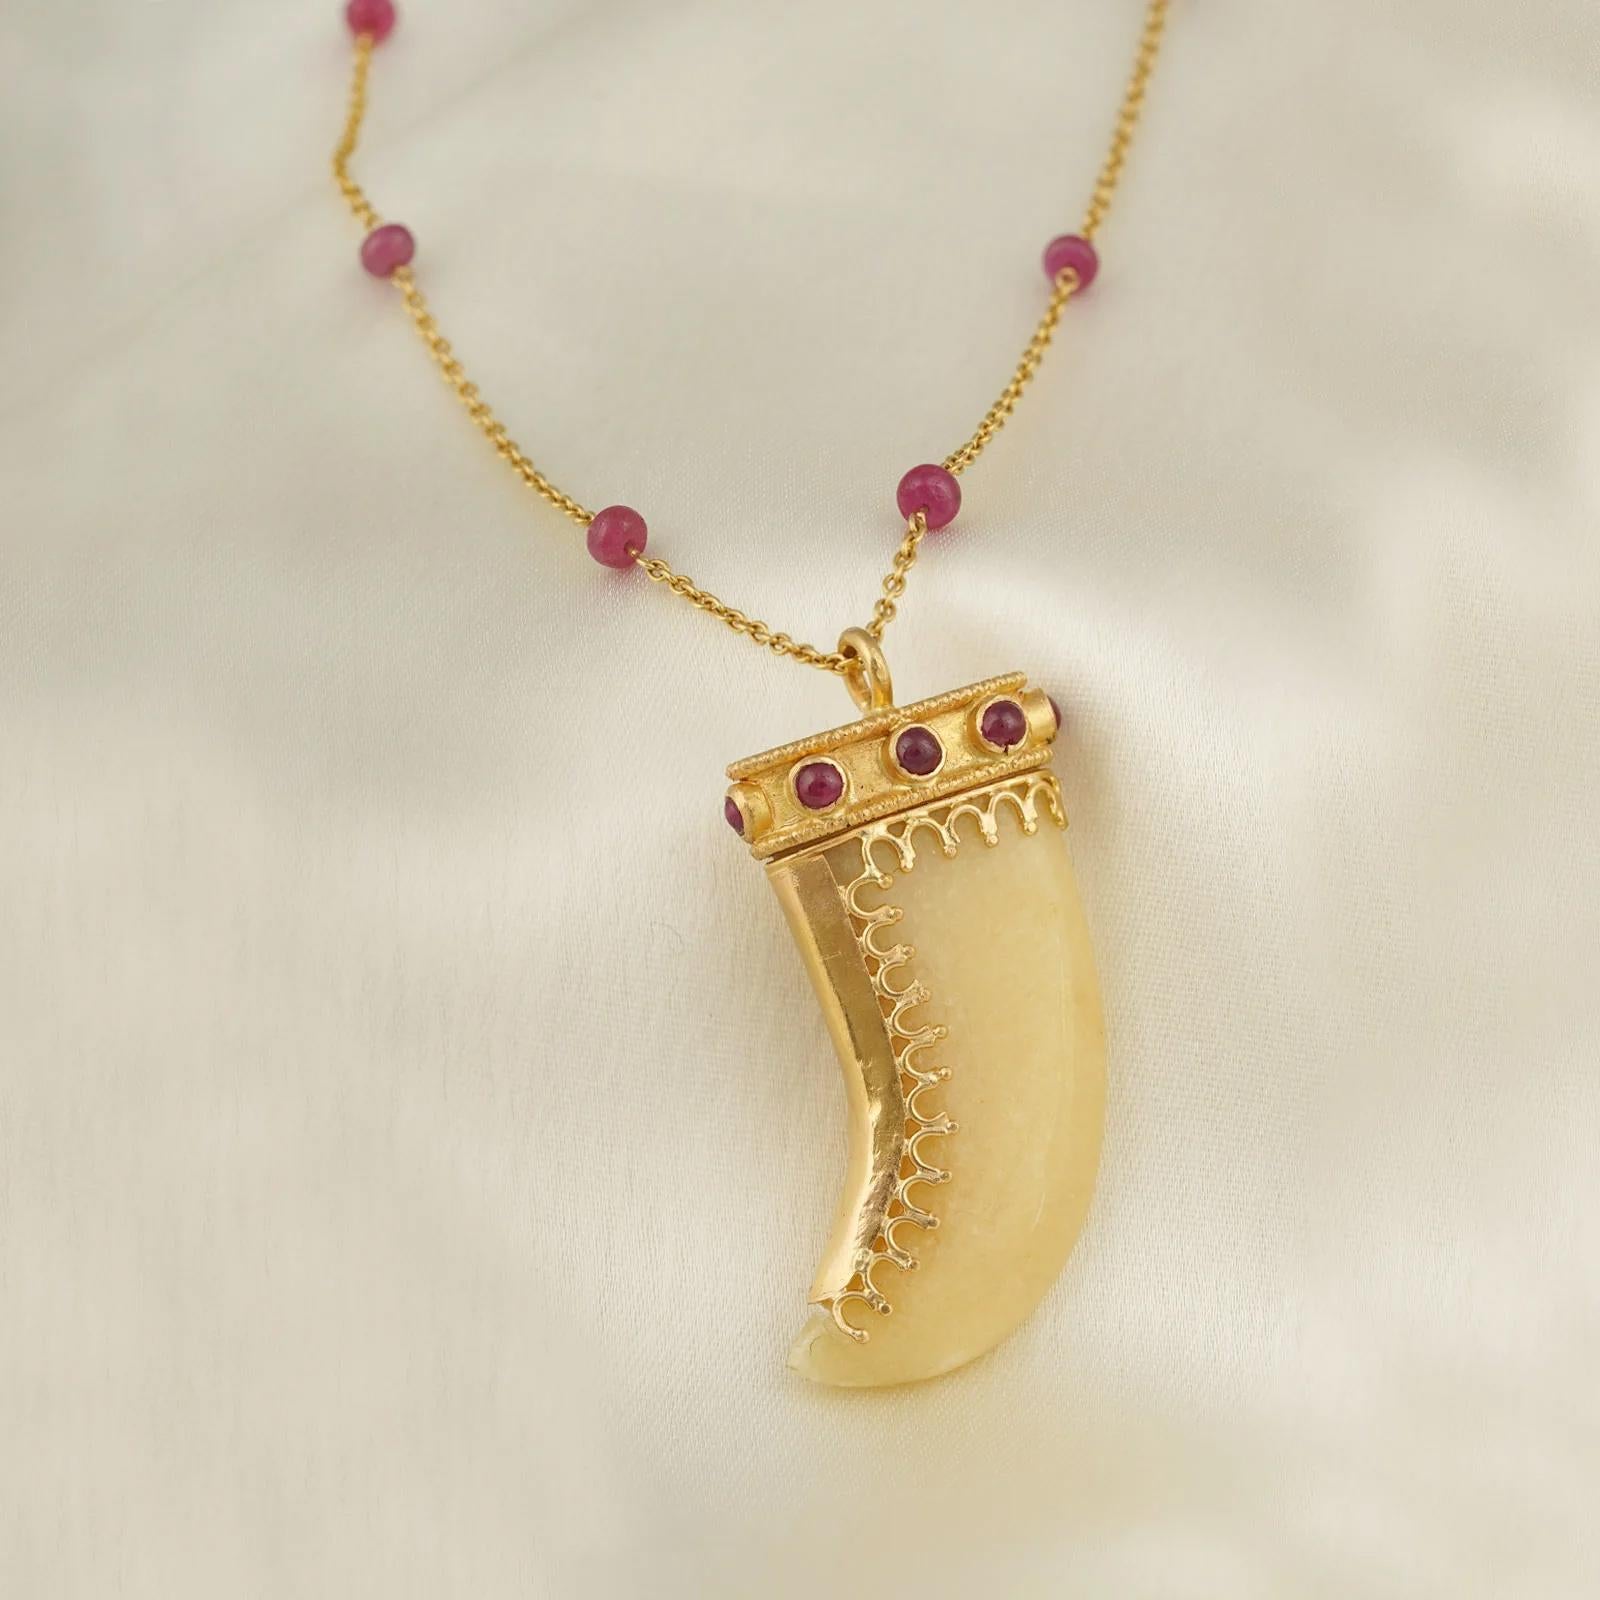 Gold(22K) : 8.06g
Gold(18K) : 3.46g
Gemstones : Ruby, Yellow Quartz, Glass-filled Ruby 

The belief and the motif of the 'claw' both transcend time and geography, and have seen multiple adaptations tying in with mystic beliefs. Drawing on this